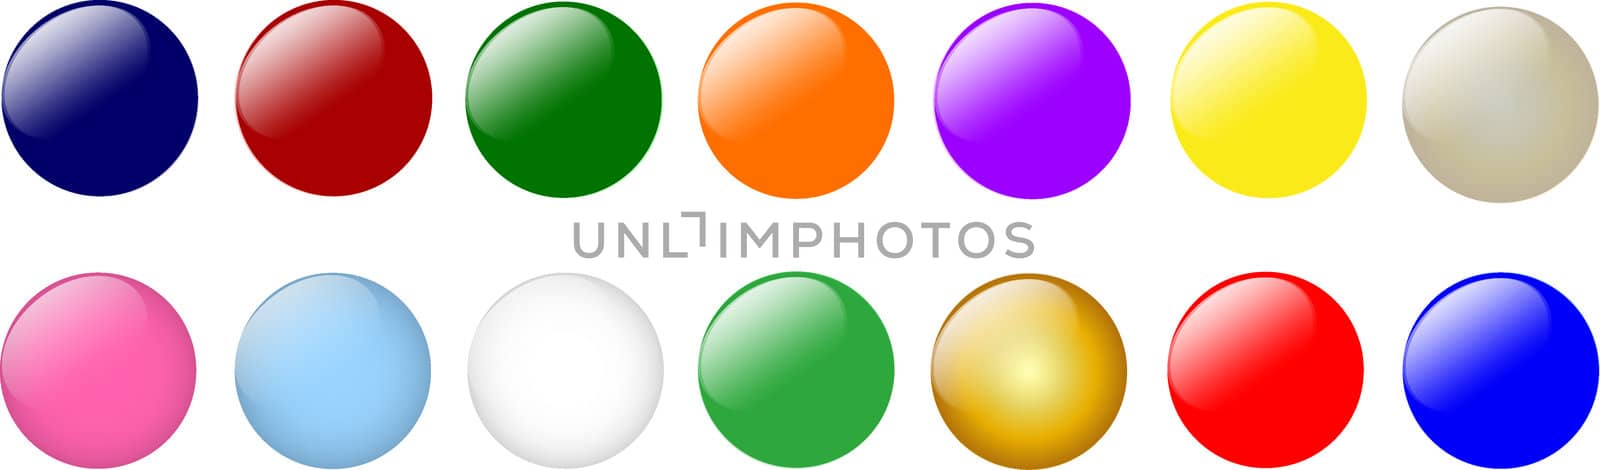 set of colorful buttons by peromarketing